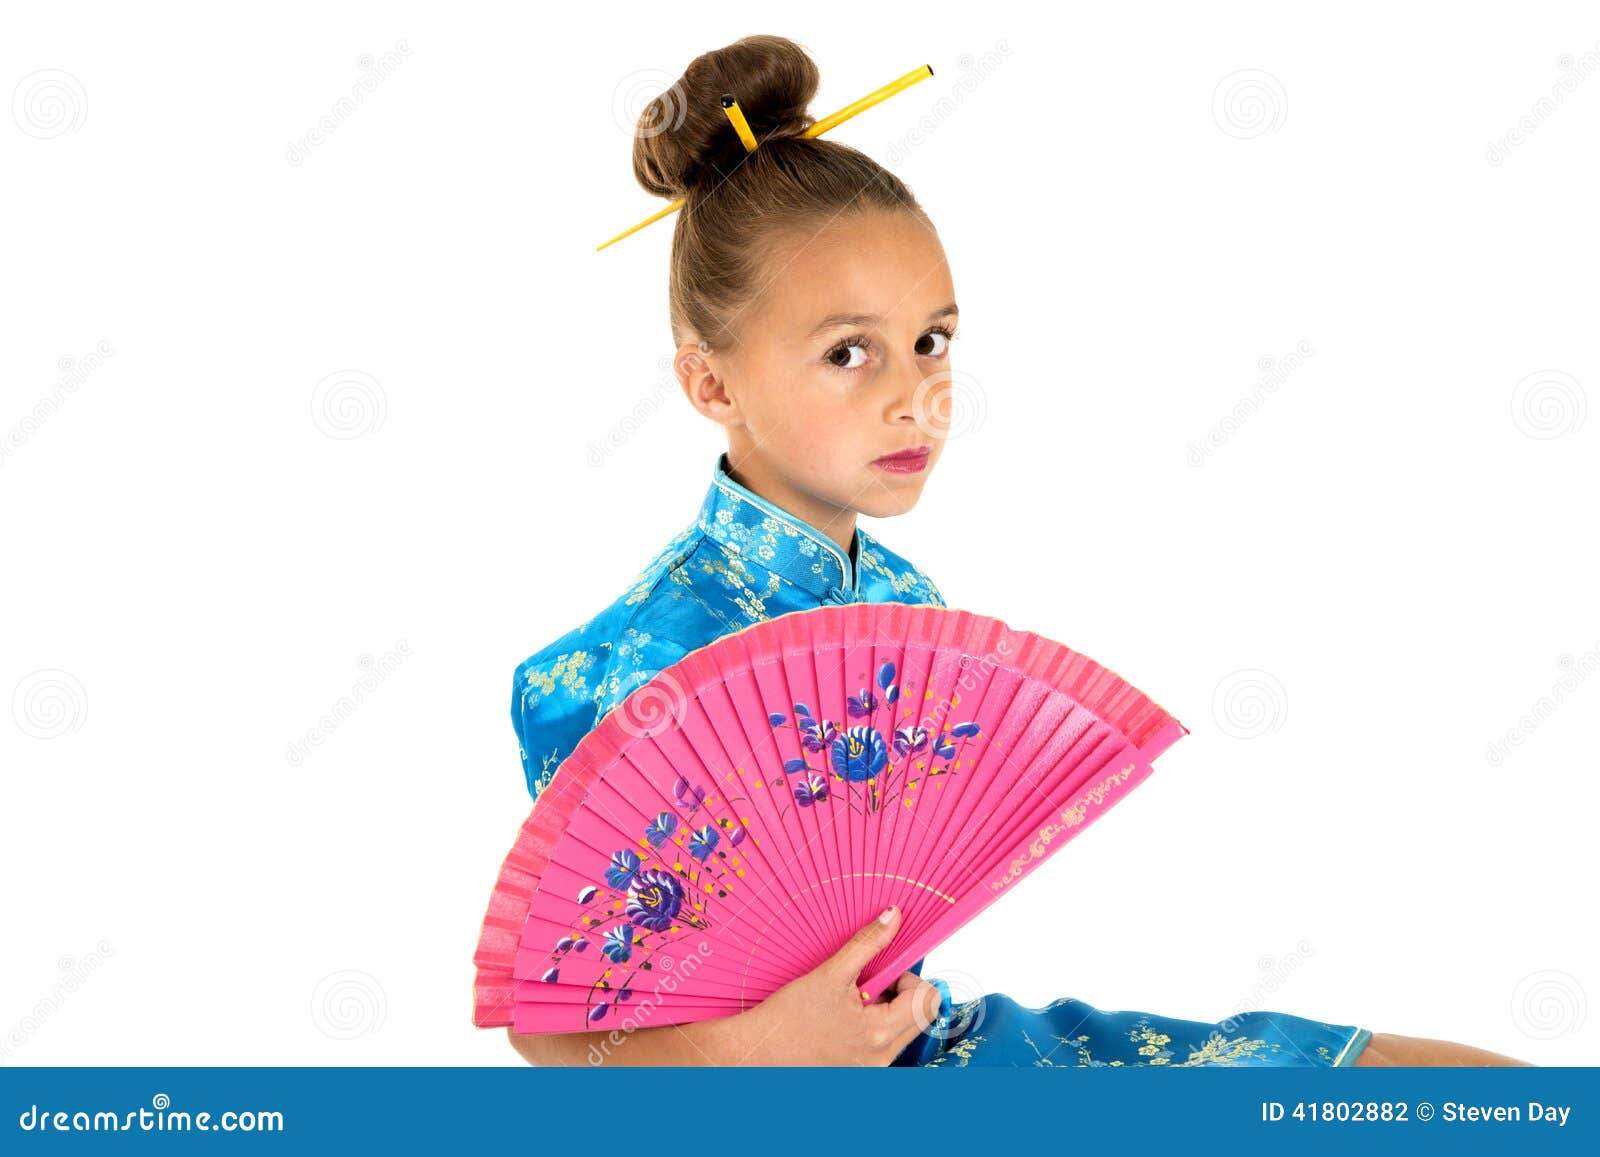 Cute Girl in Chinese Dress Holding a Fan Stock Photo - Image of ...